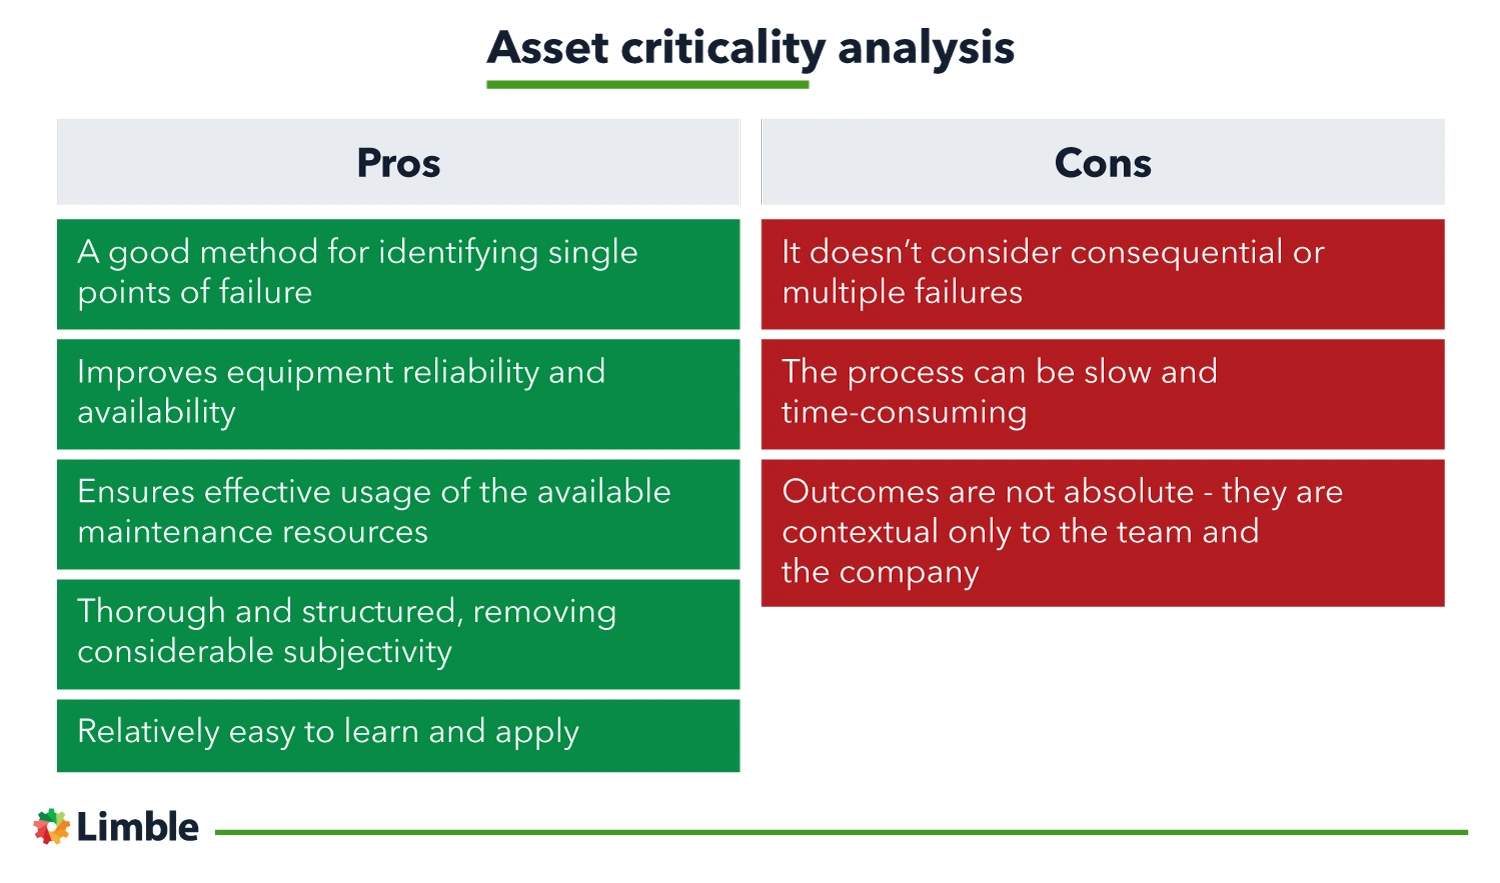 pros and cons of criticality assessment